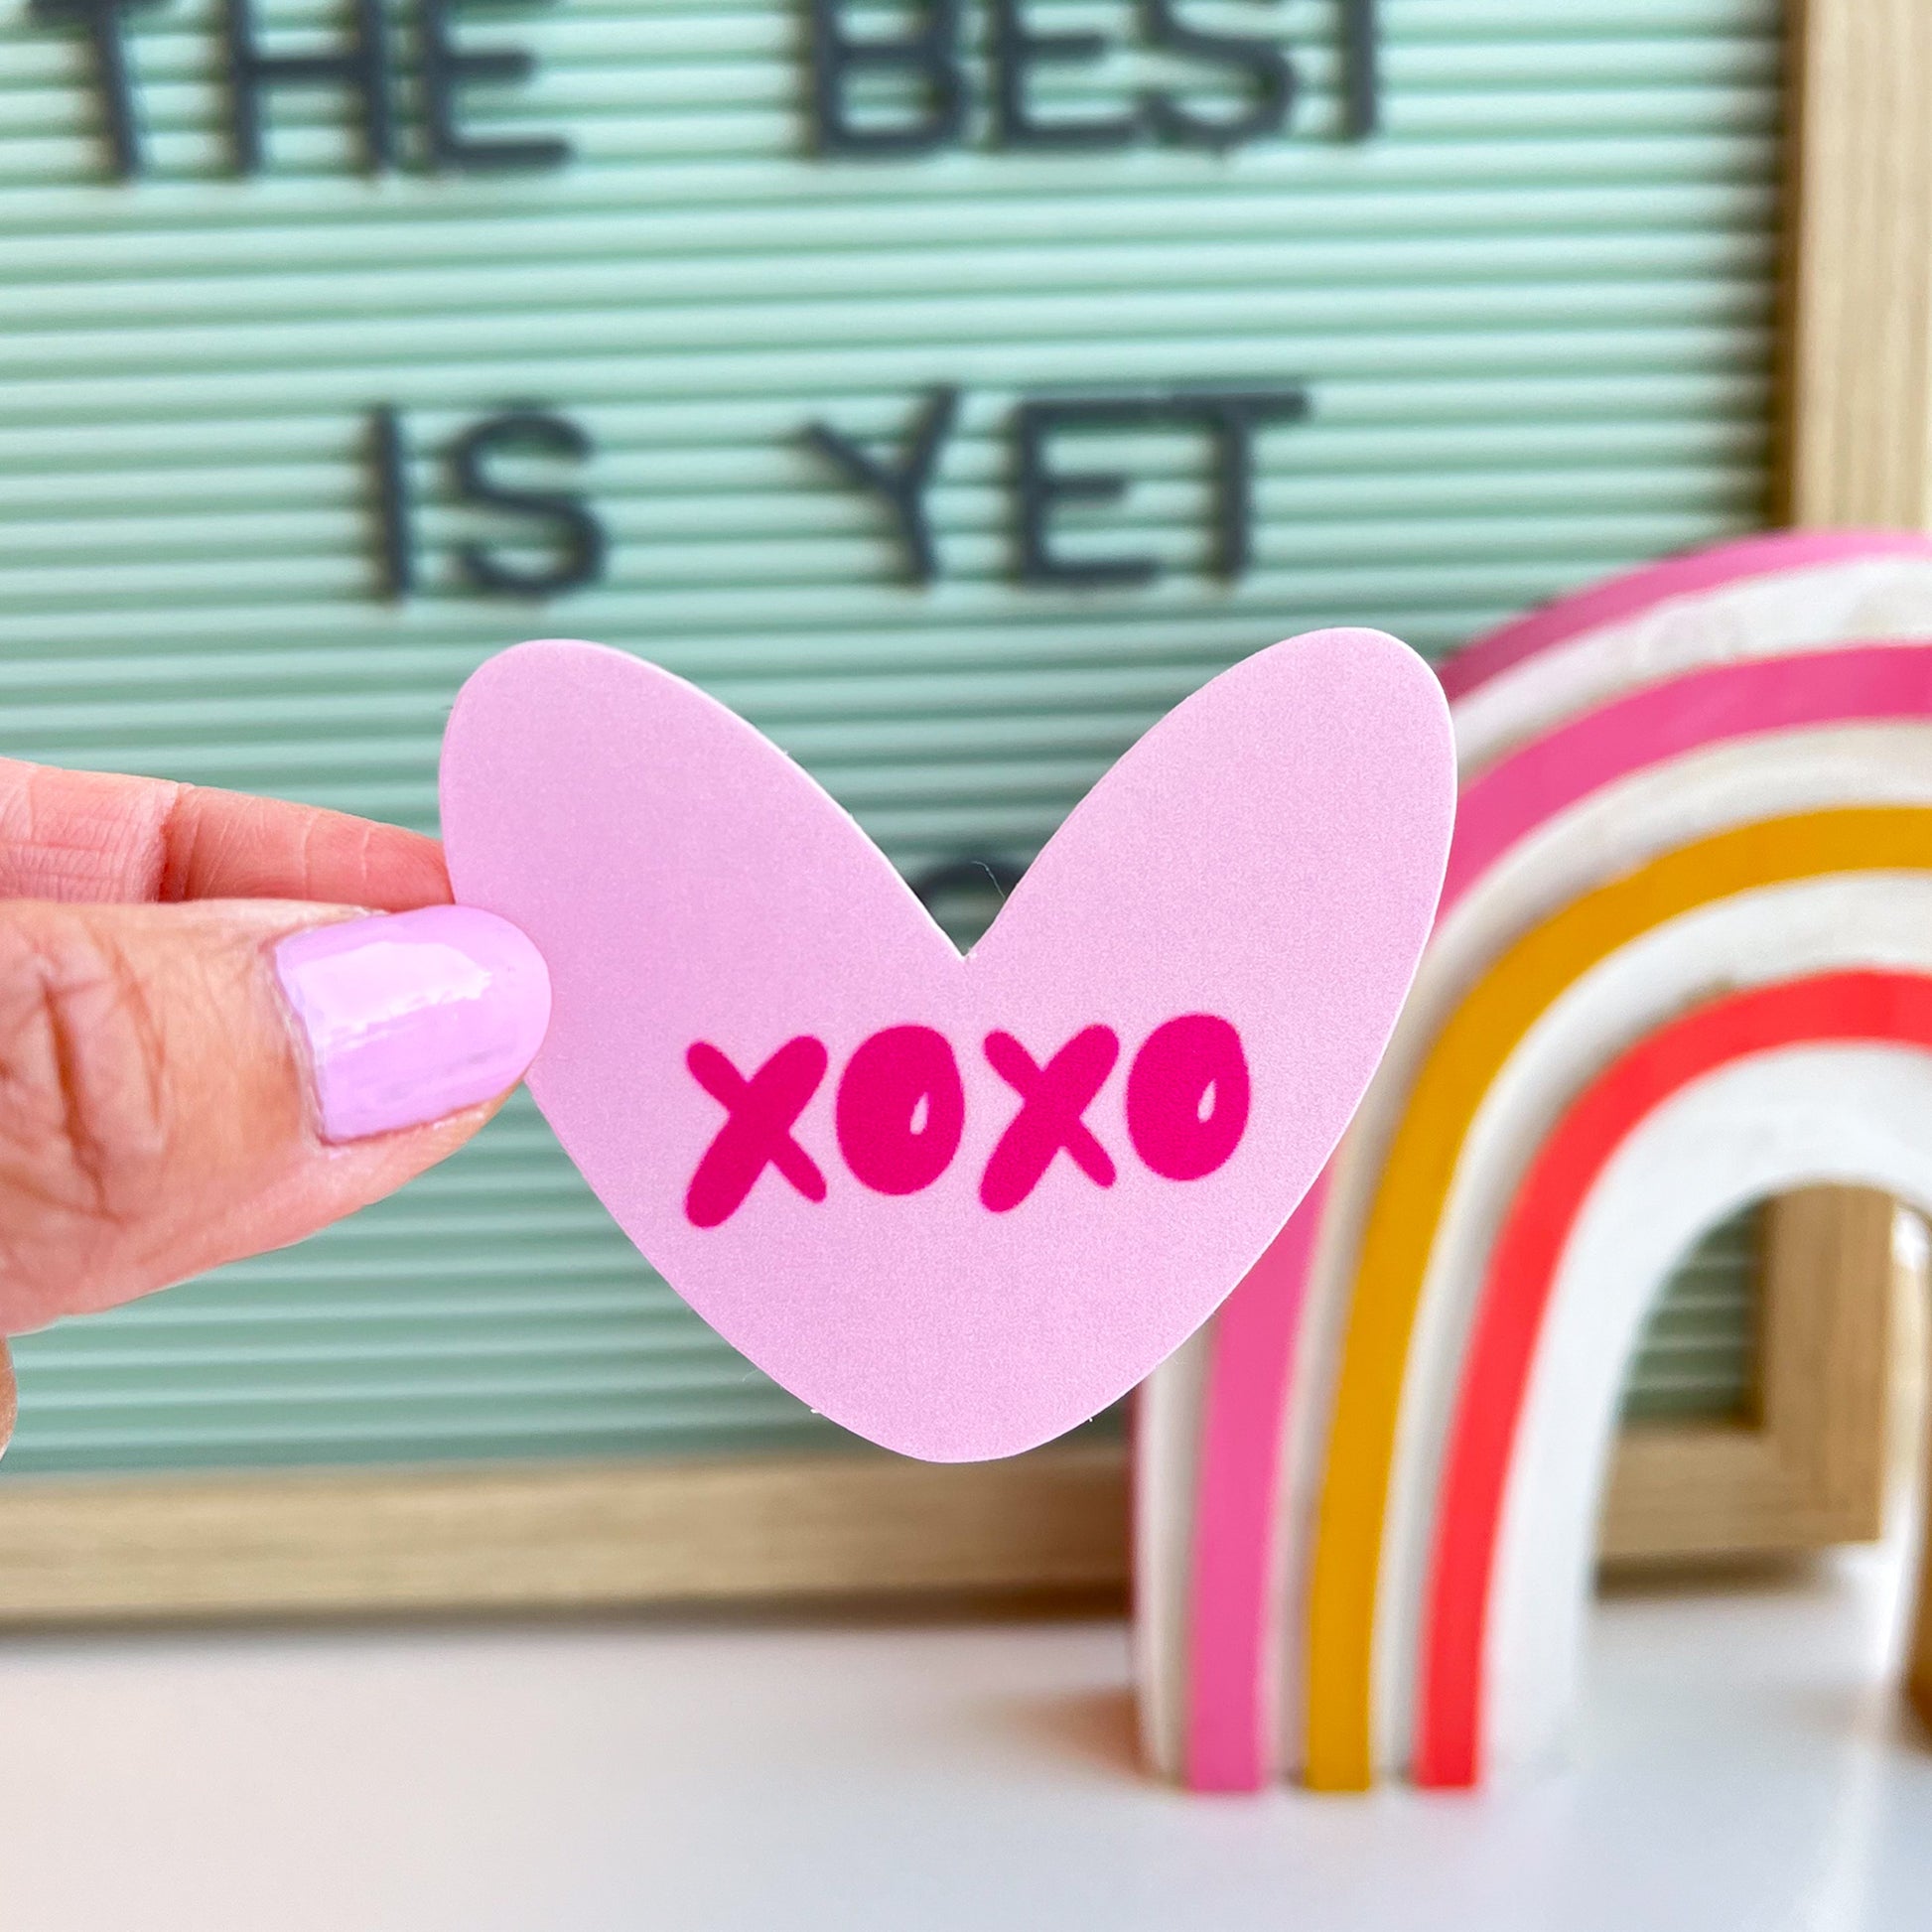 XOXO heart sticker in hand. Perfect for Valentine's Day and classroom gift exchanges.